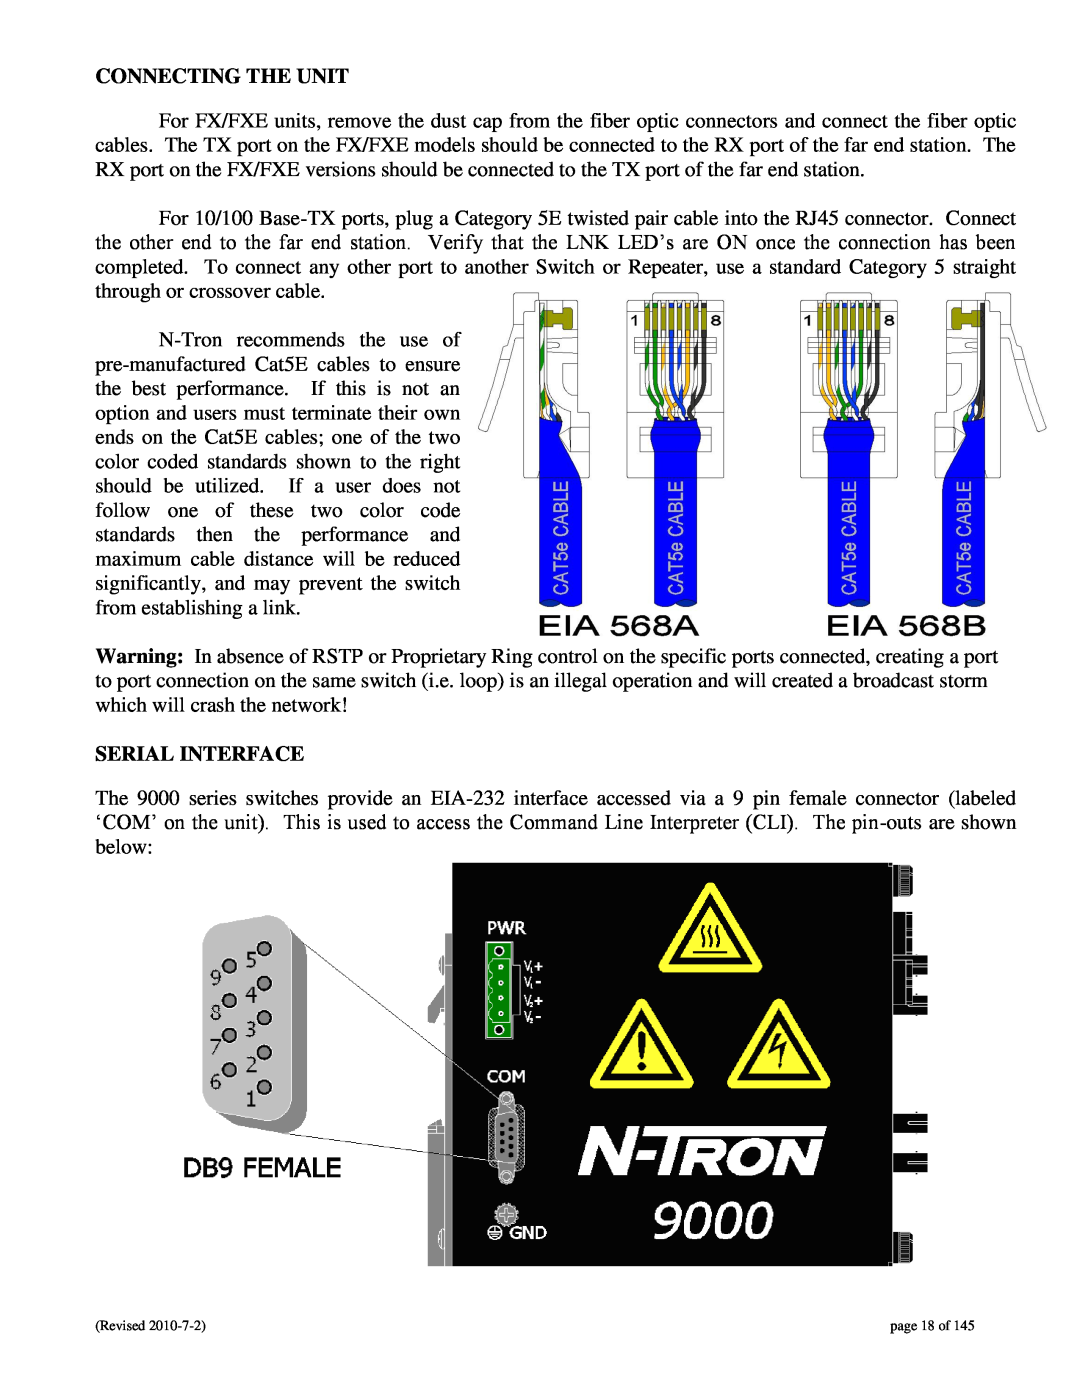 N-Tron 9000 user manual Connecting The Unit, Serial Interface, page 18 of 